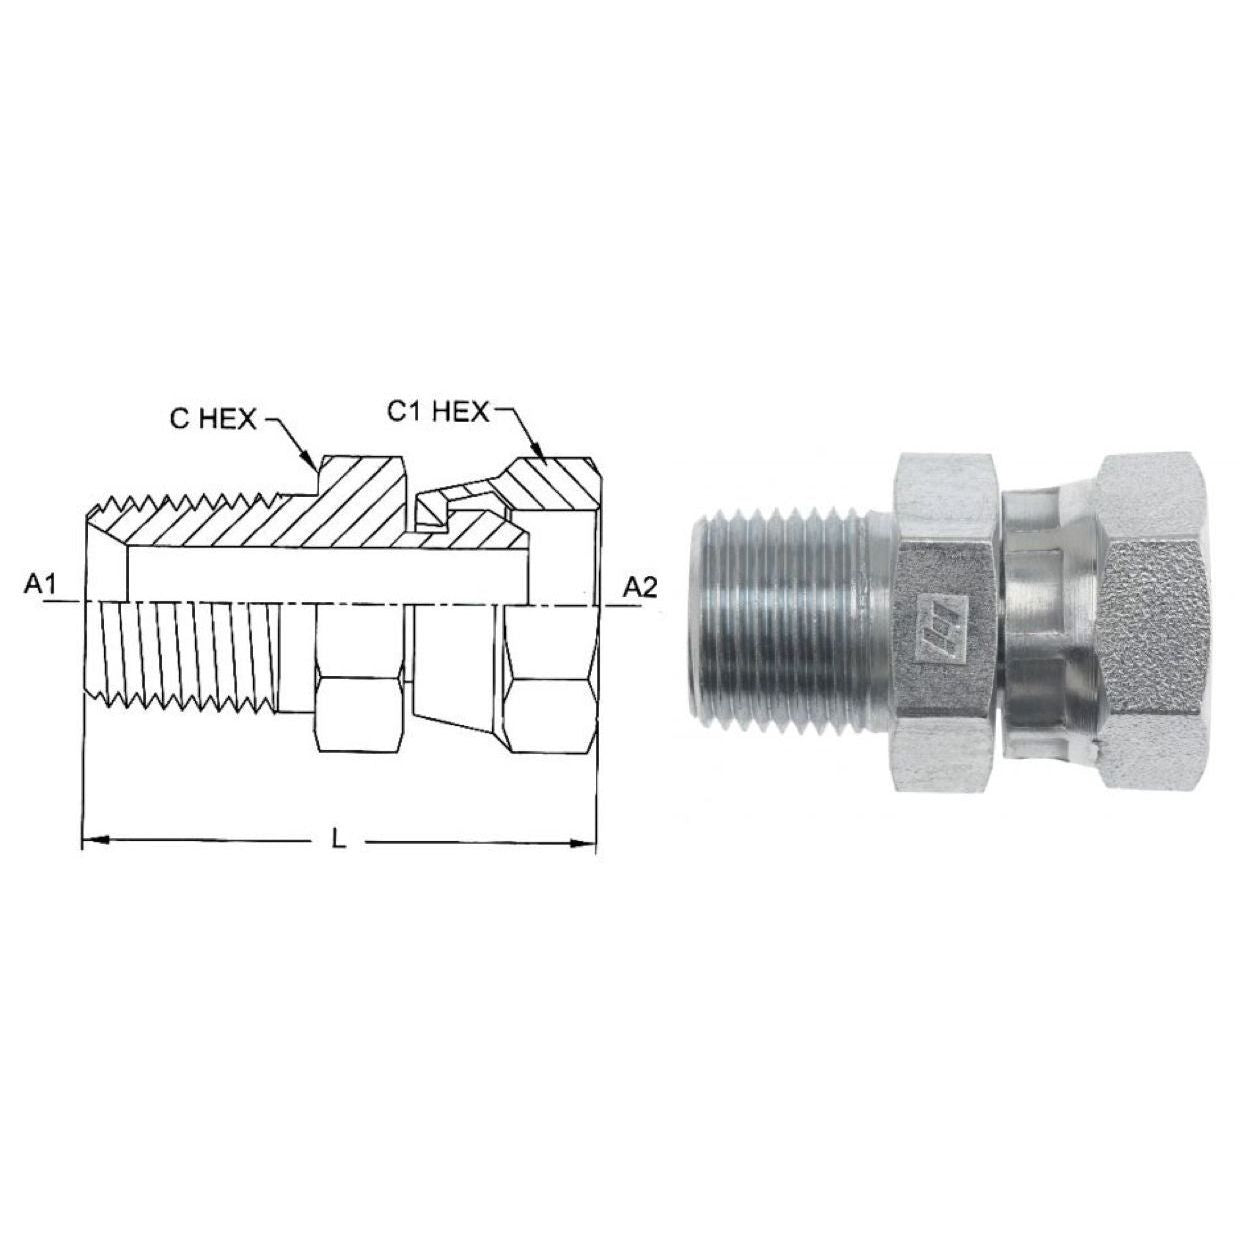 1404-16-12-SS : OneHydraulics Straight Adapter, 1 Male NPT x 0.75 (3/4) Female NPT Swivel, Stainless Steel, 2700psi